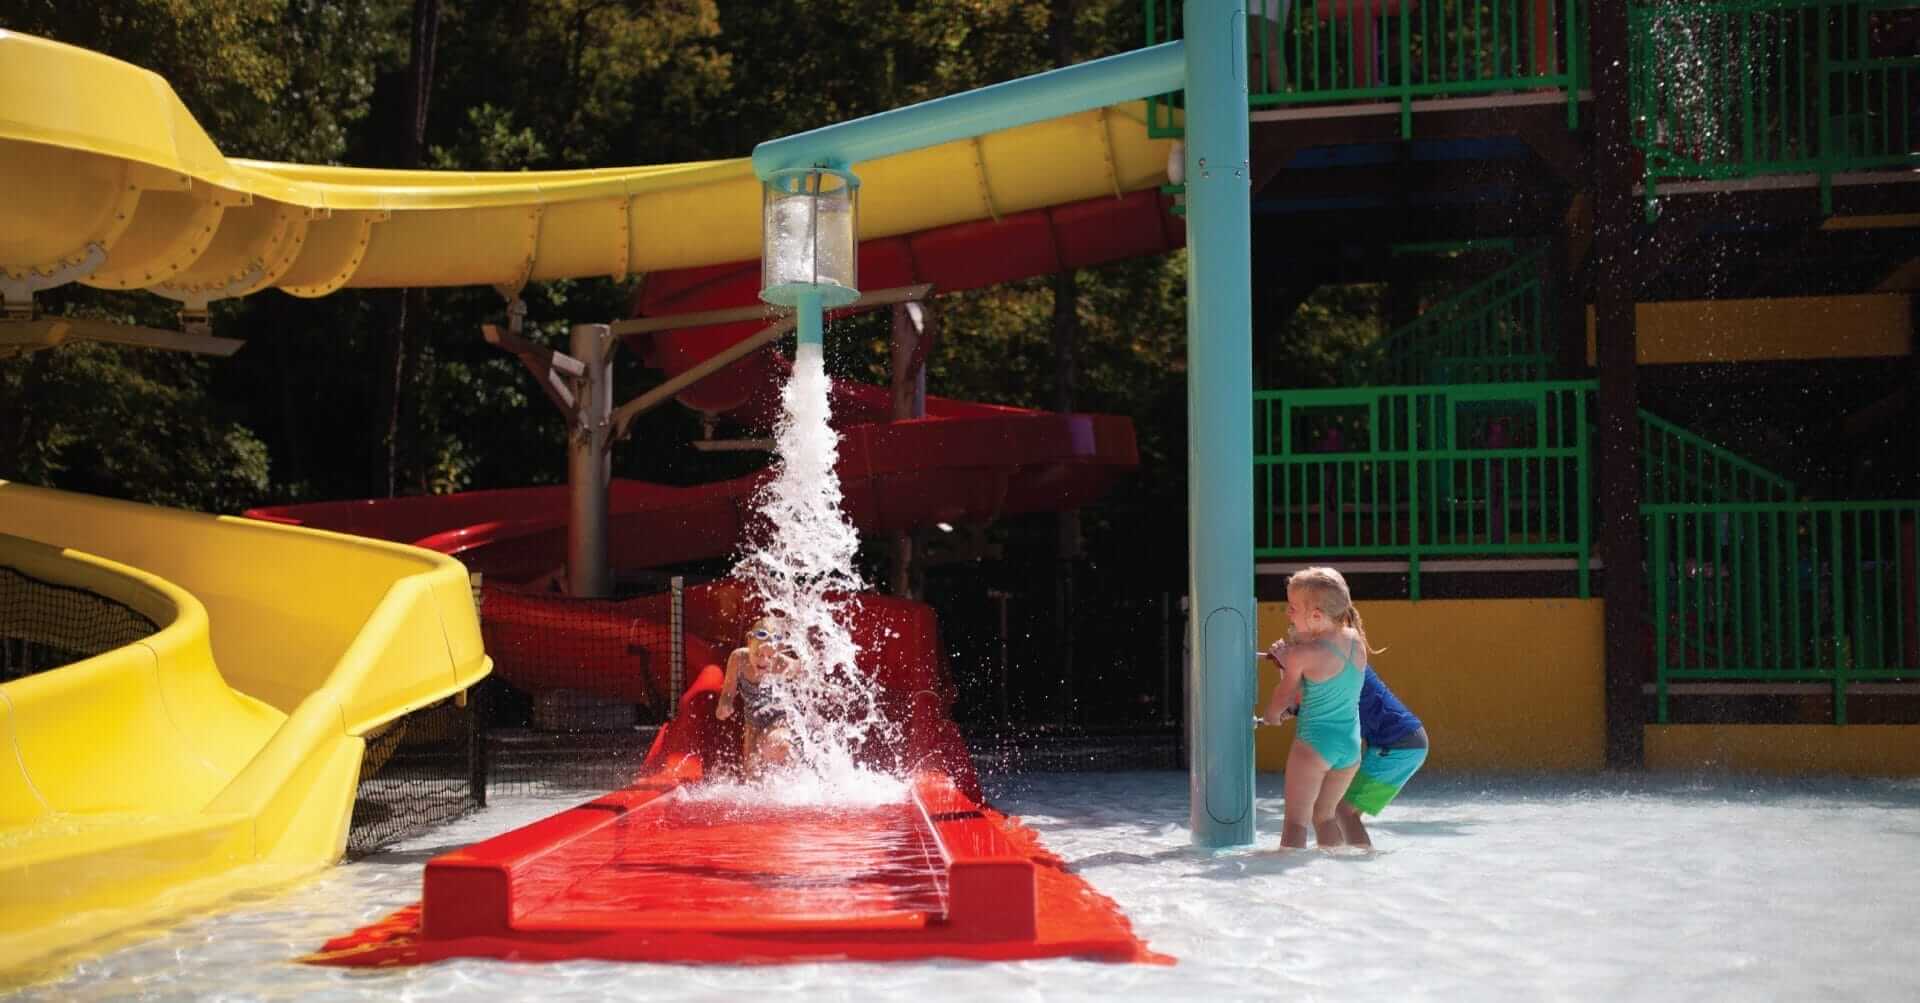 Two young kids activate the pour over water feature at the Jellystone Golden Vally RV Park in Bostic, North Carolina.